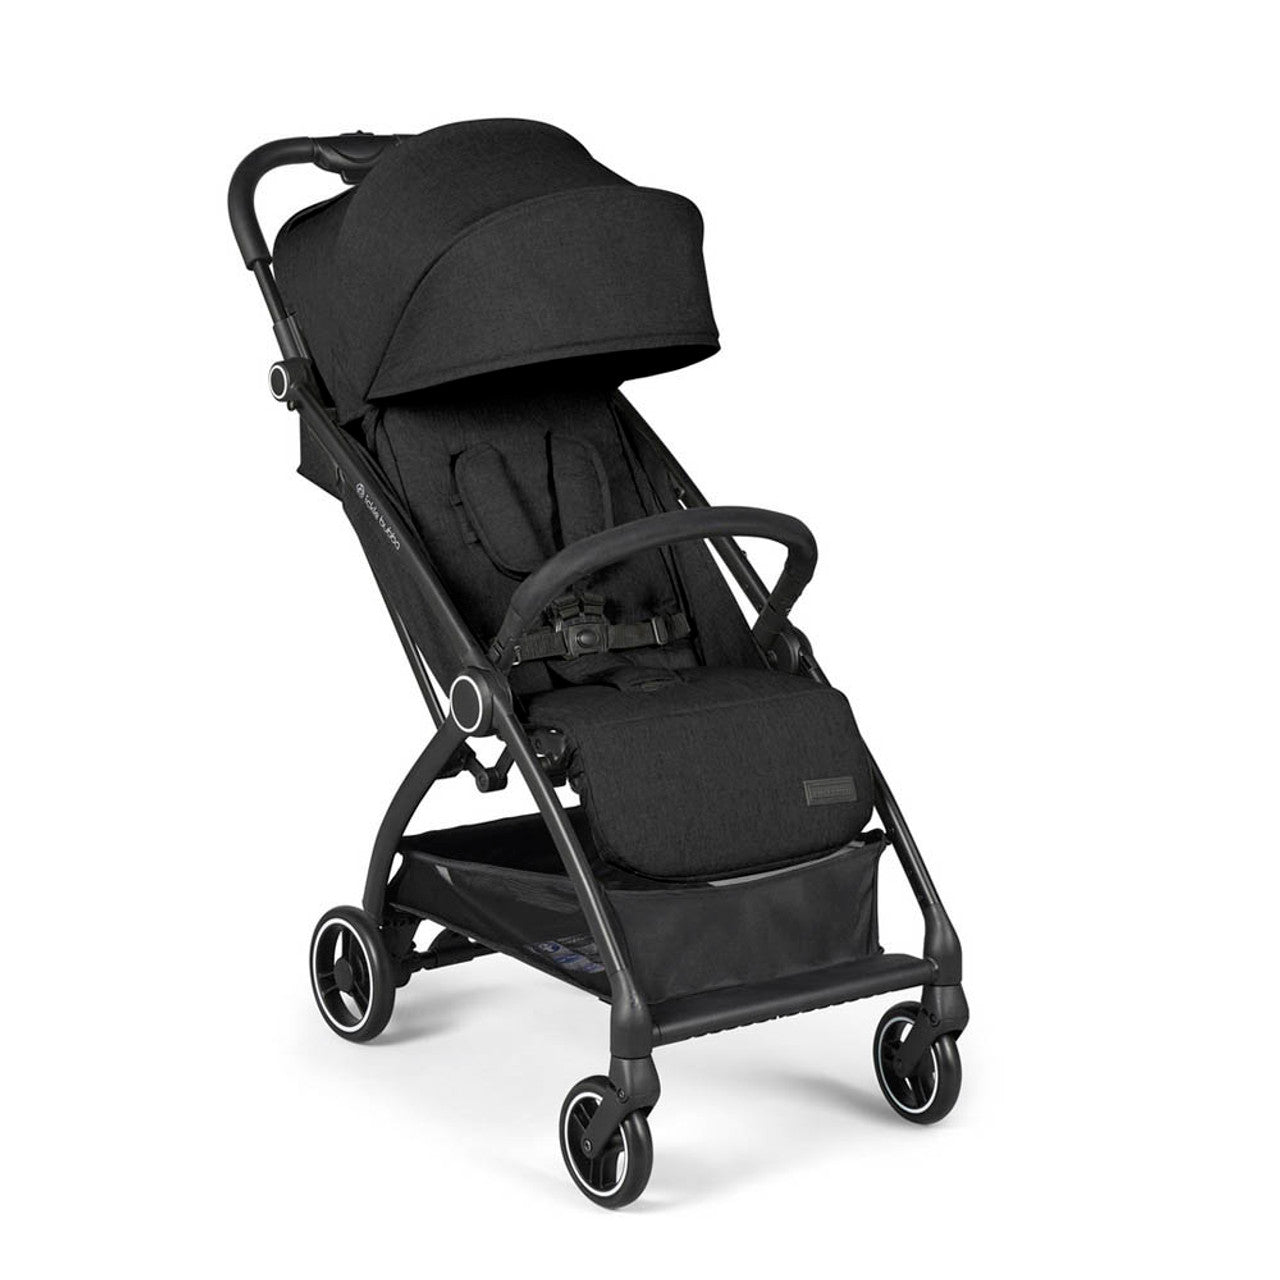 Ickle Bubba Aries Autofold Stroller - Black - For Your Little One